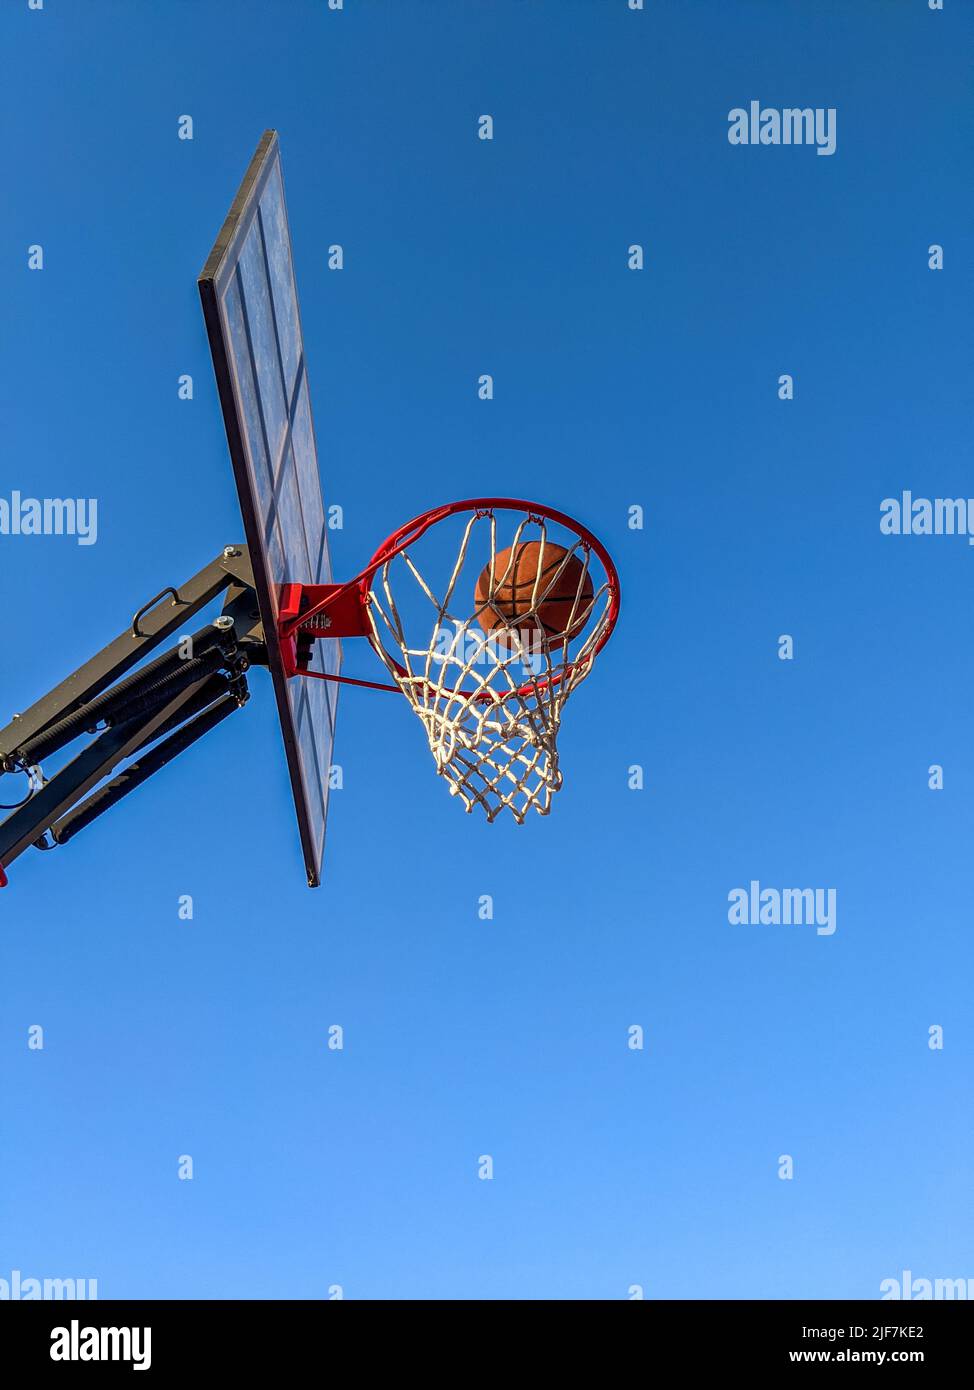 Ball in a basket on a background of clear sky Stock Photo